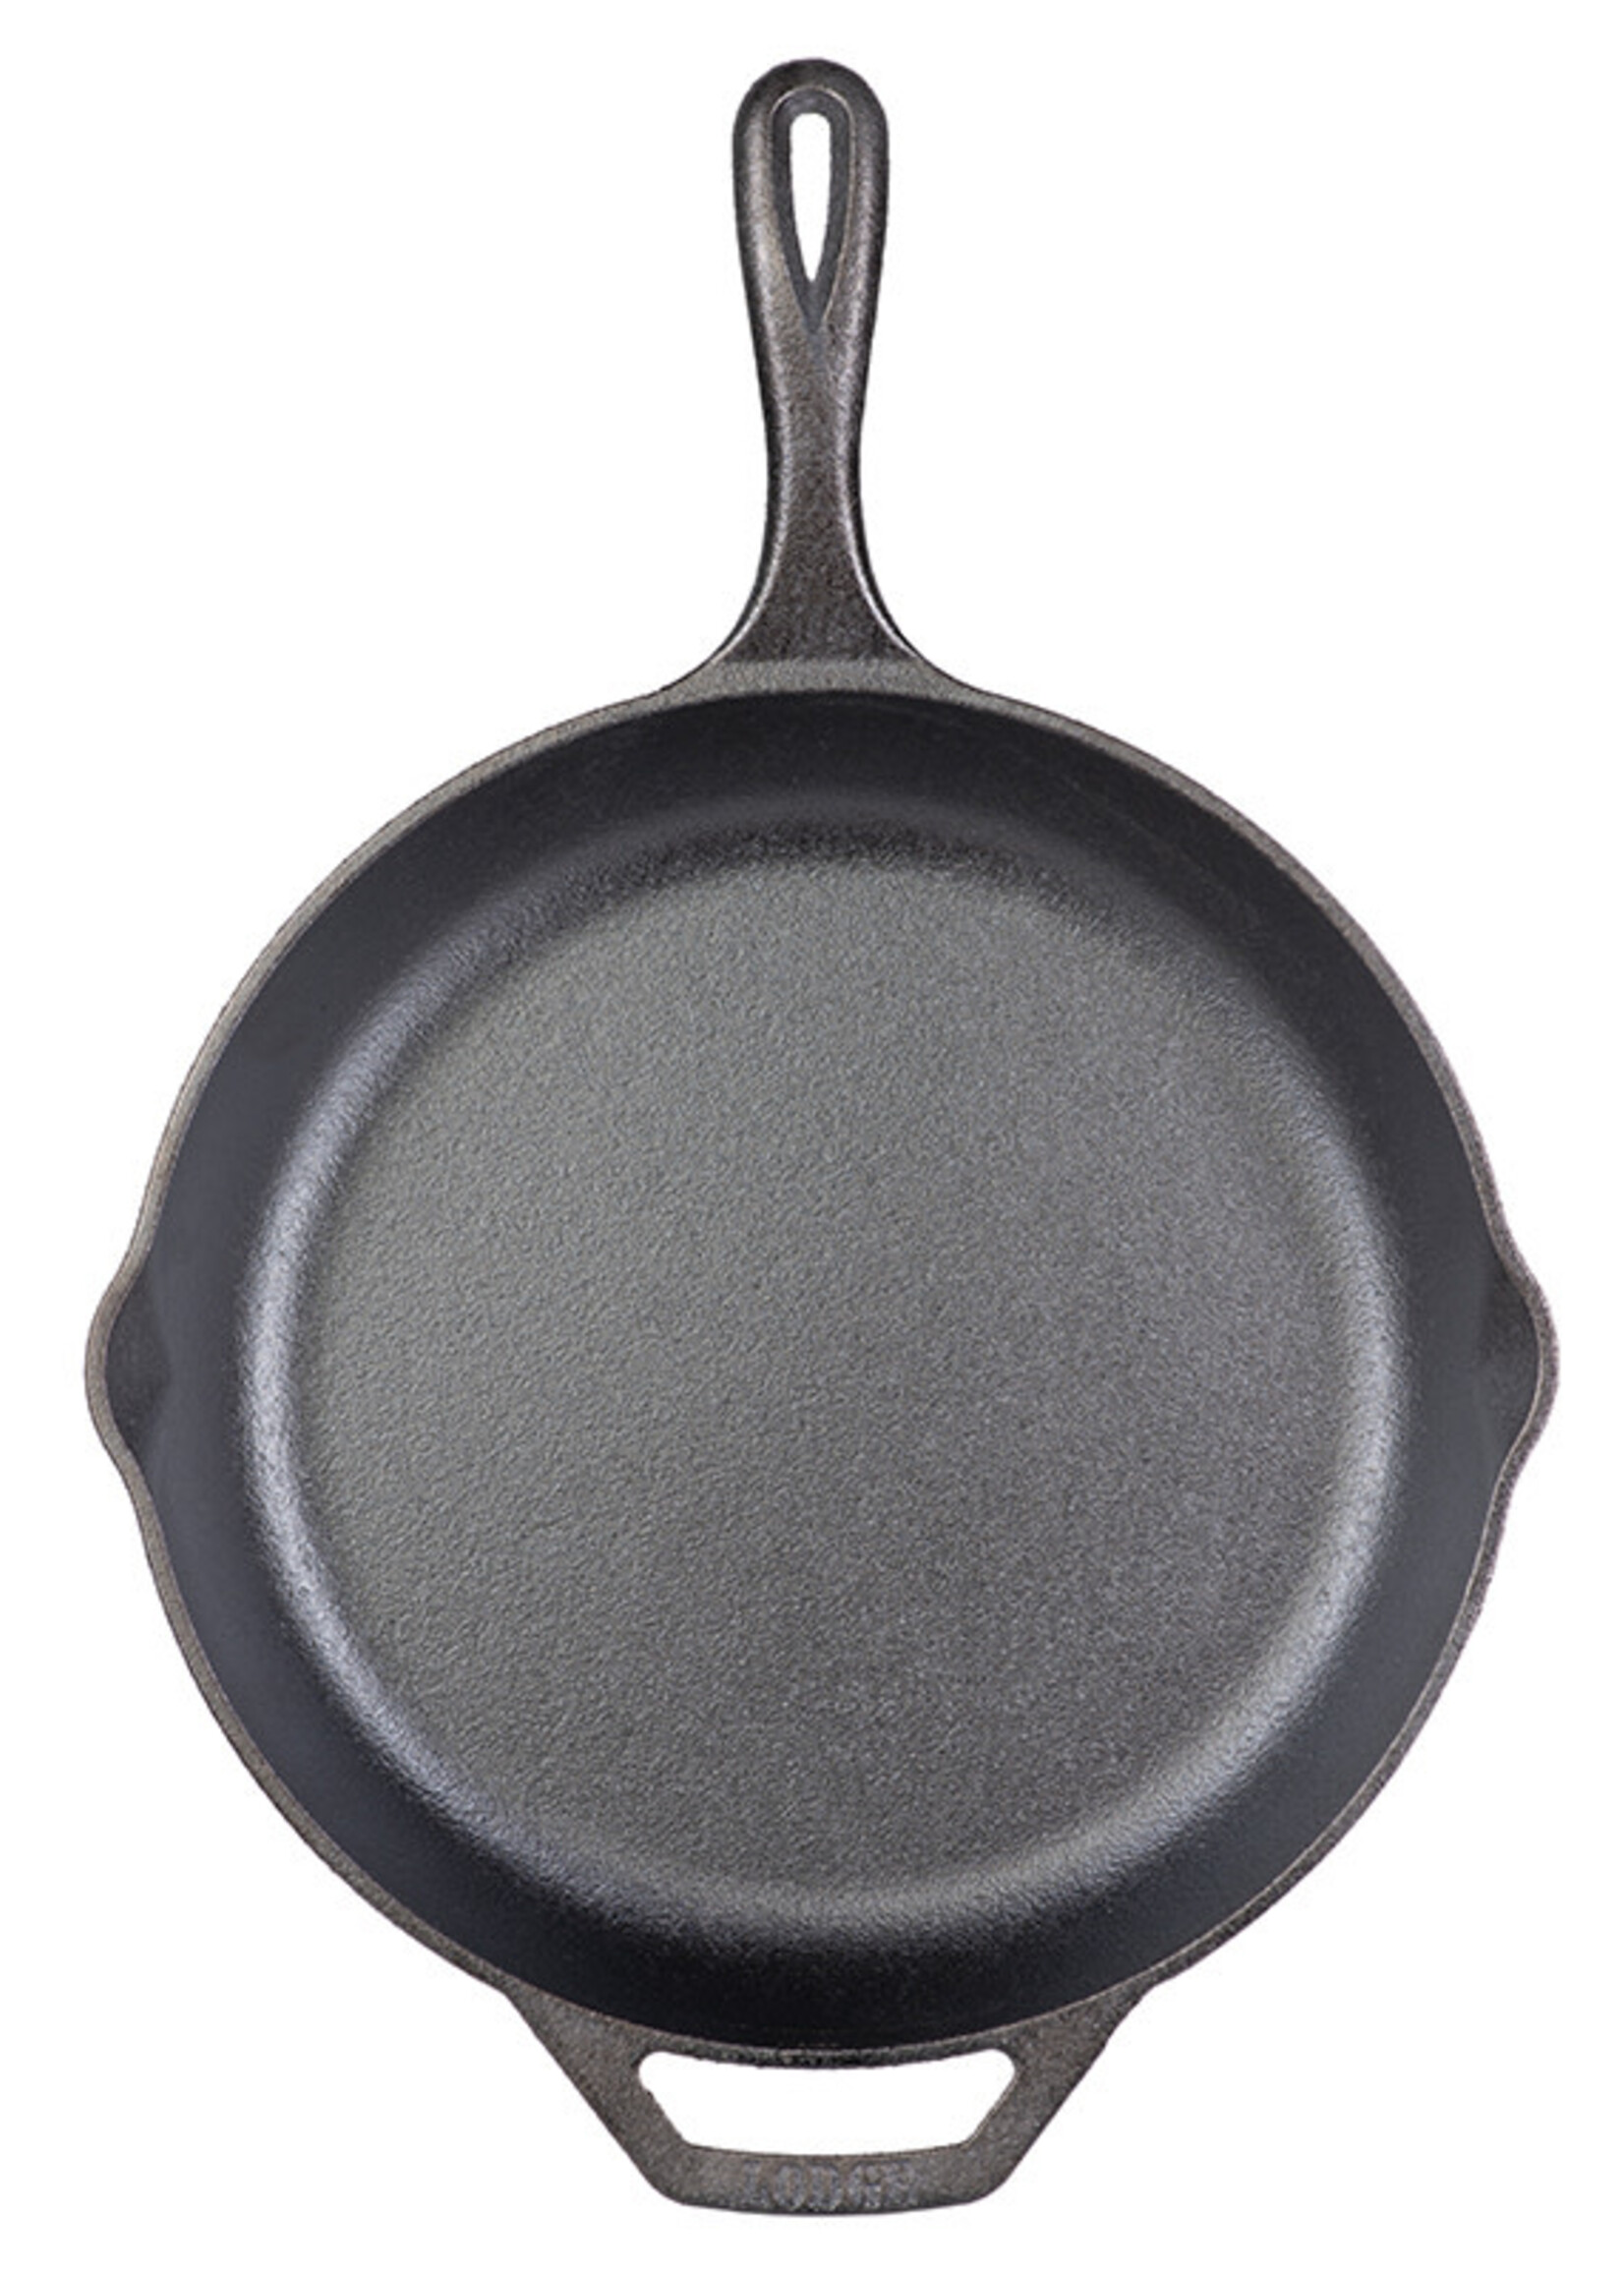 Lodge 12" Chef Style Skillet